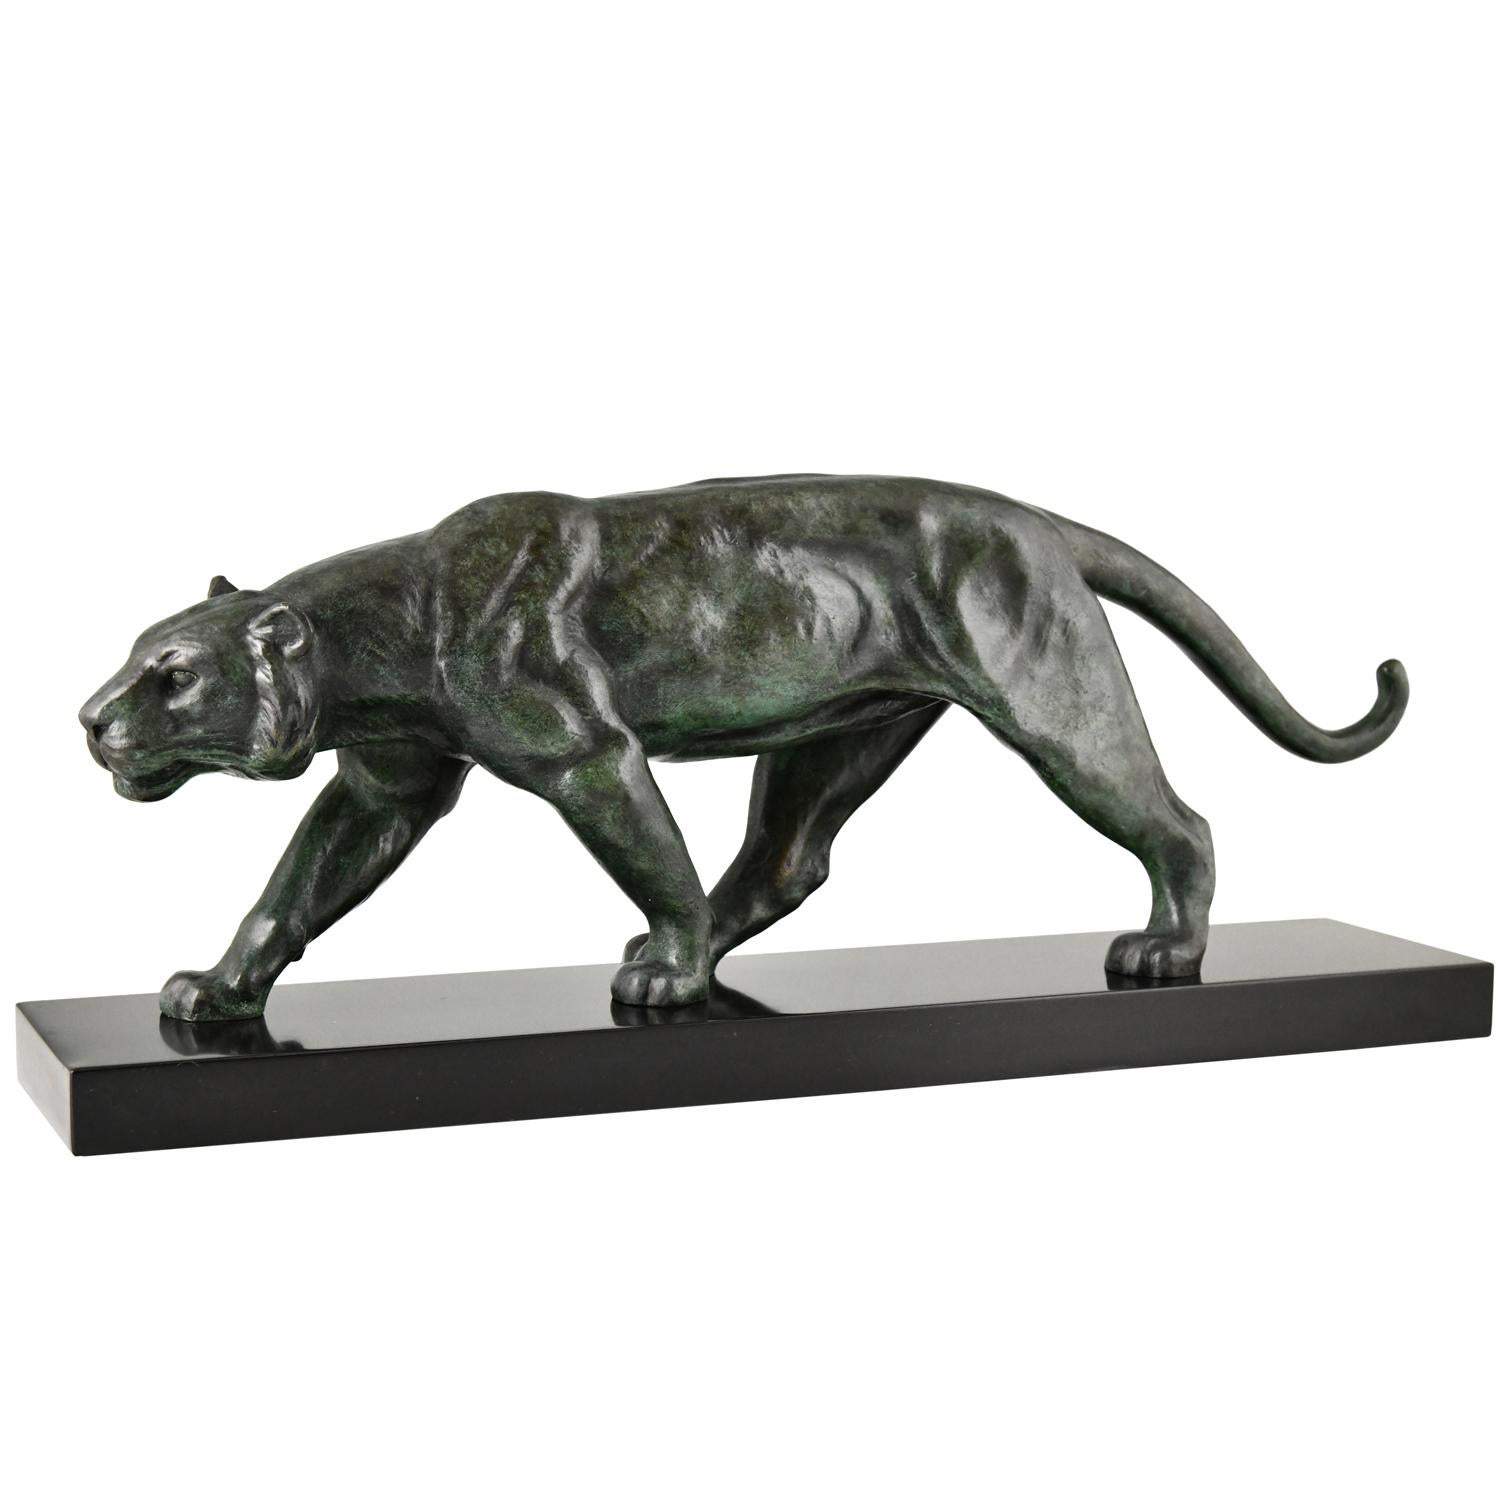 Art Deco bronze panther sculpture by Alexandre Ouline.
Bronze with green patina on Belgian black marble base 
France ca. 1930.
The artist worked in France between 1918-1940.
 
Literature:
Animals in bronze by Christopher Payne. Antique